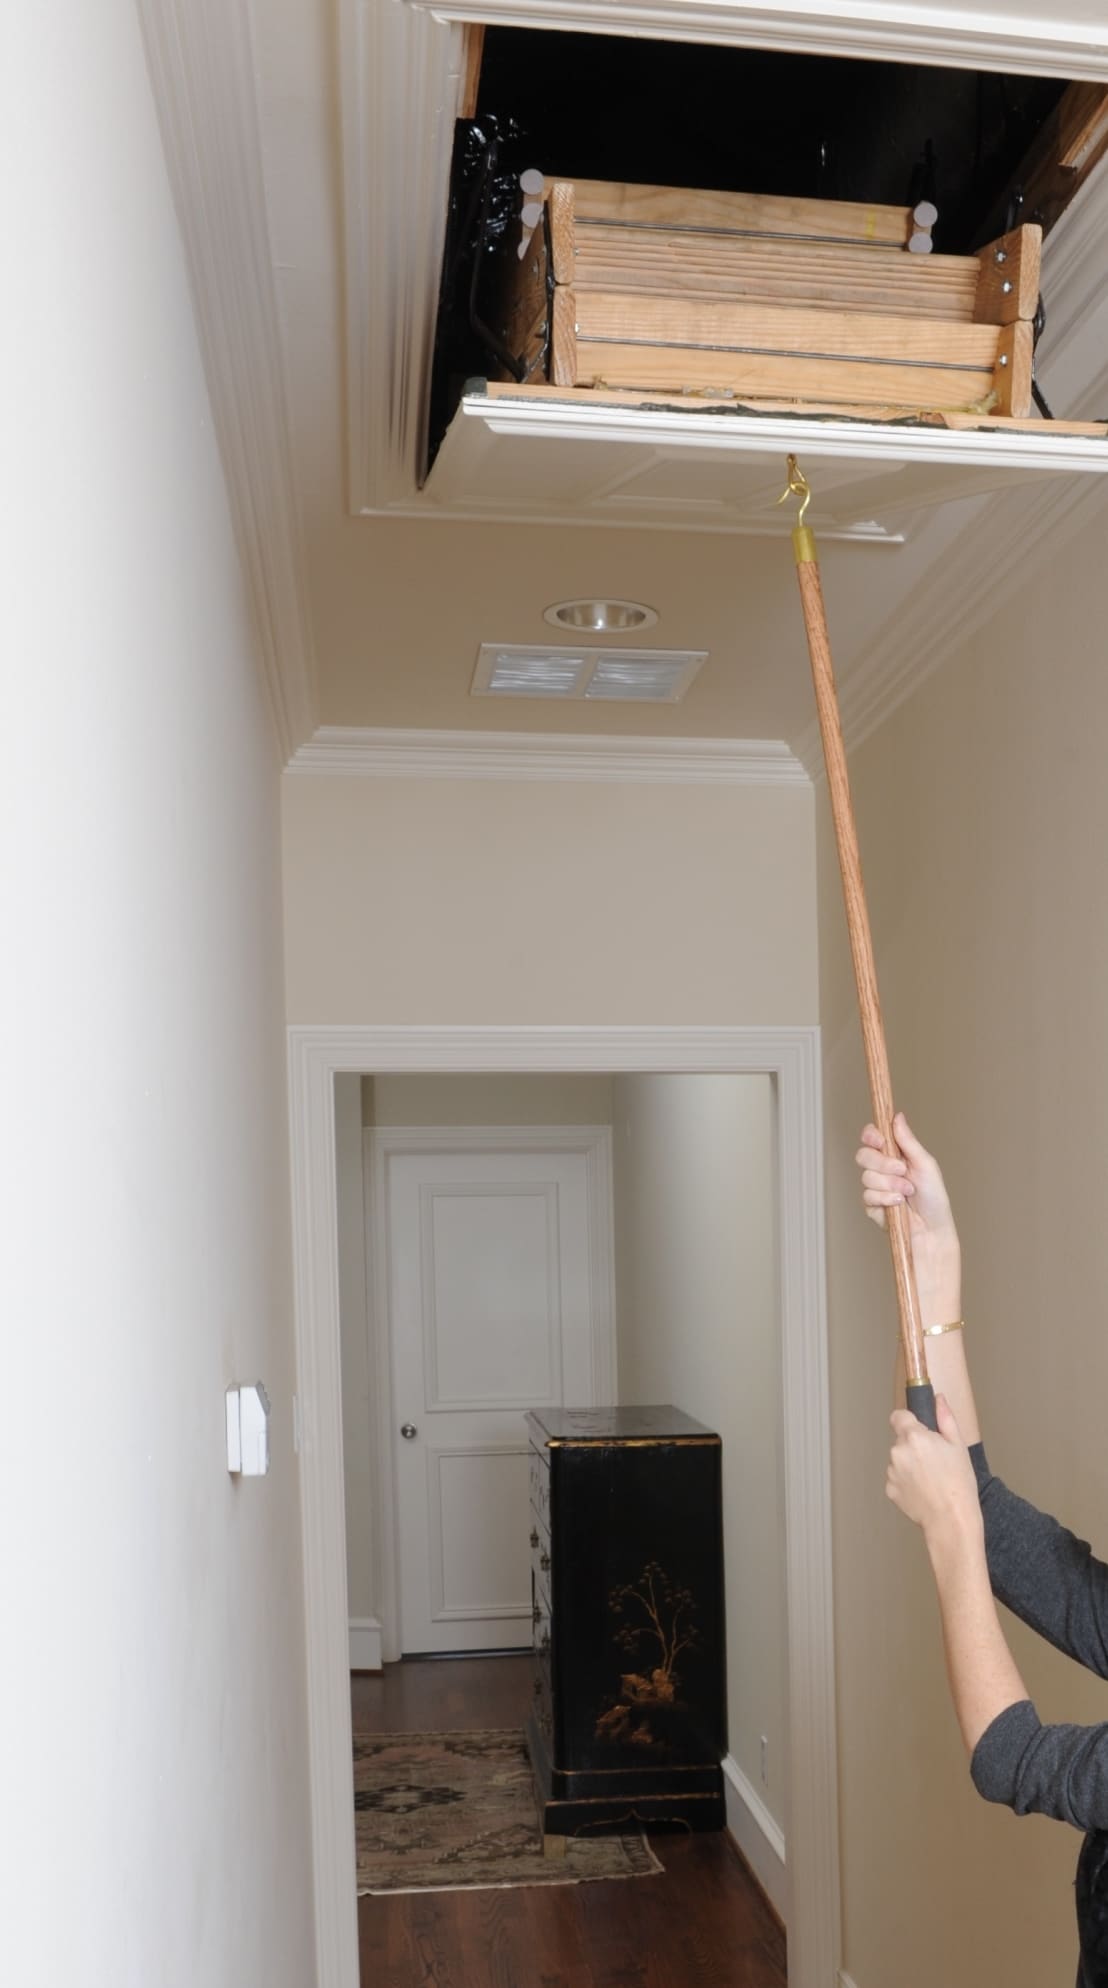 Getting Rid of the Attic Access Cord